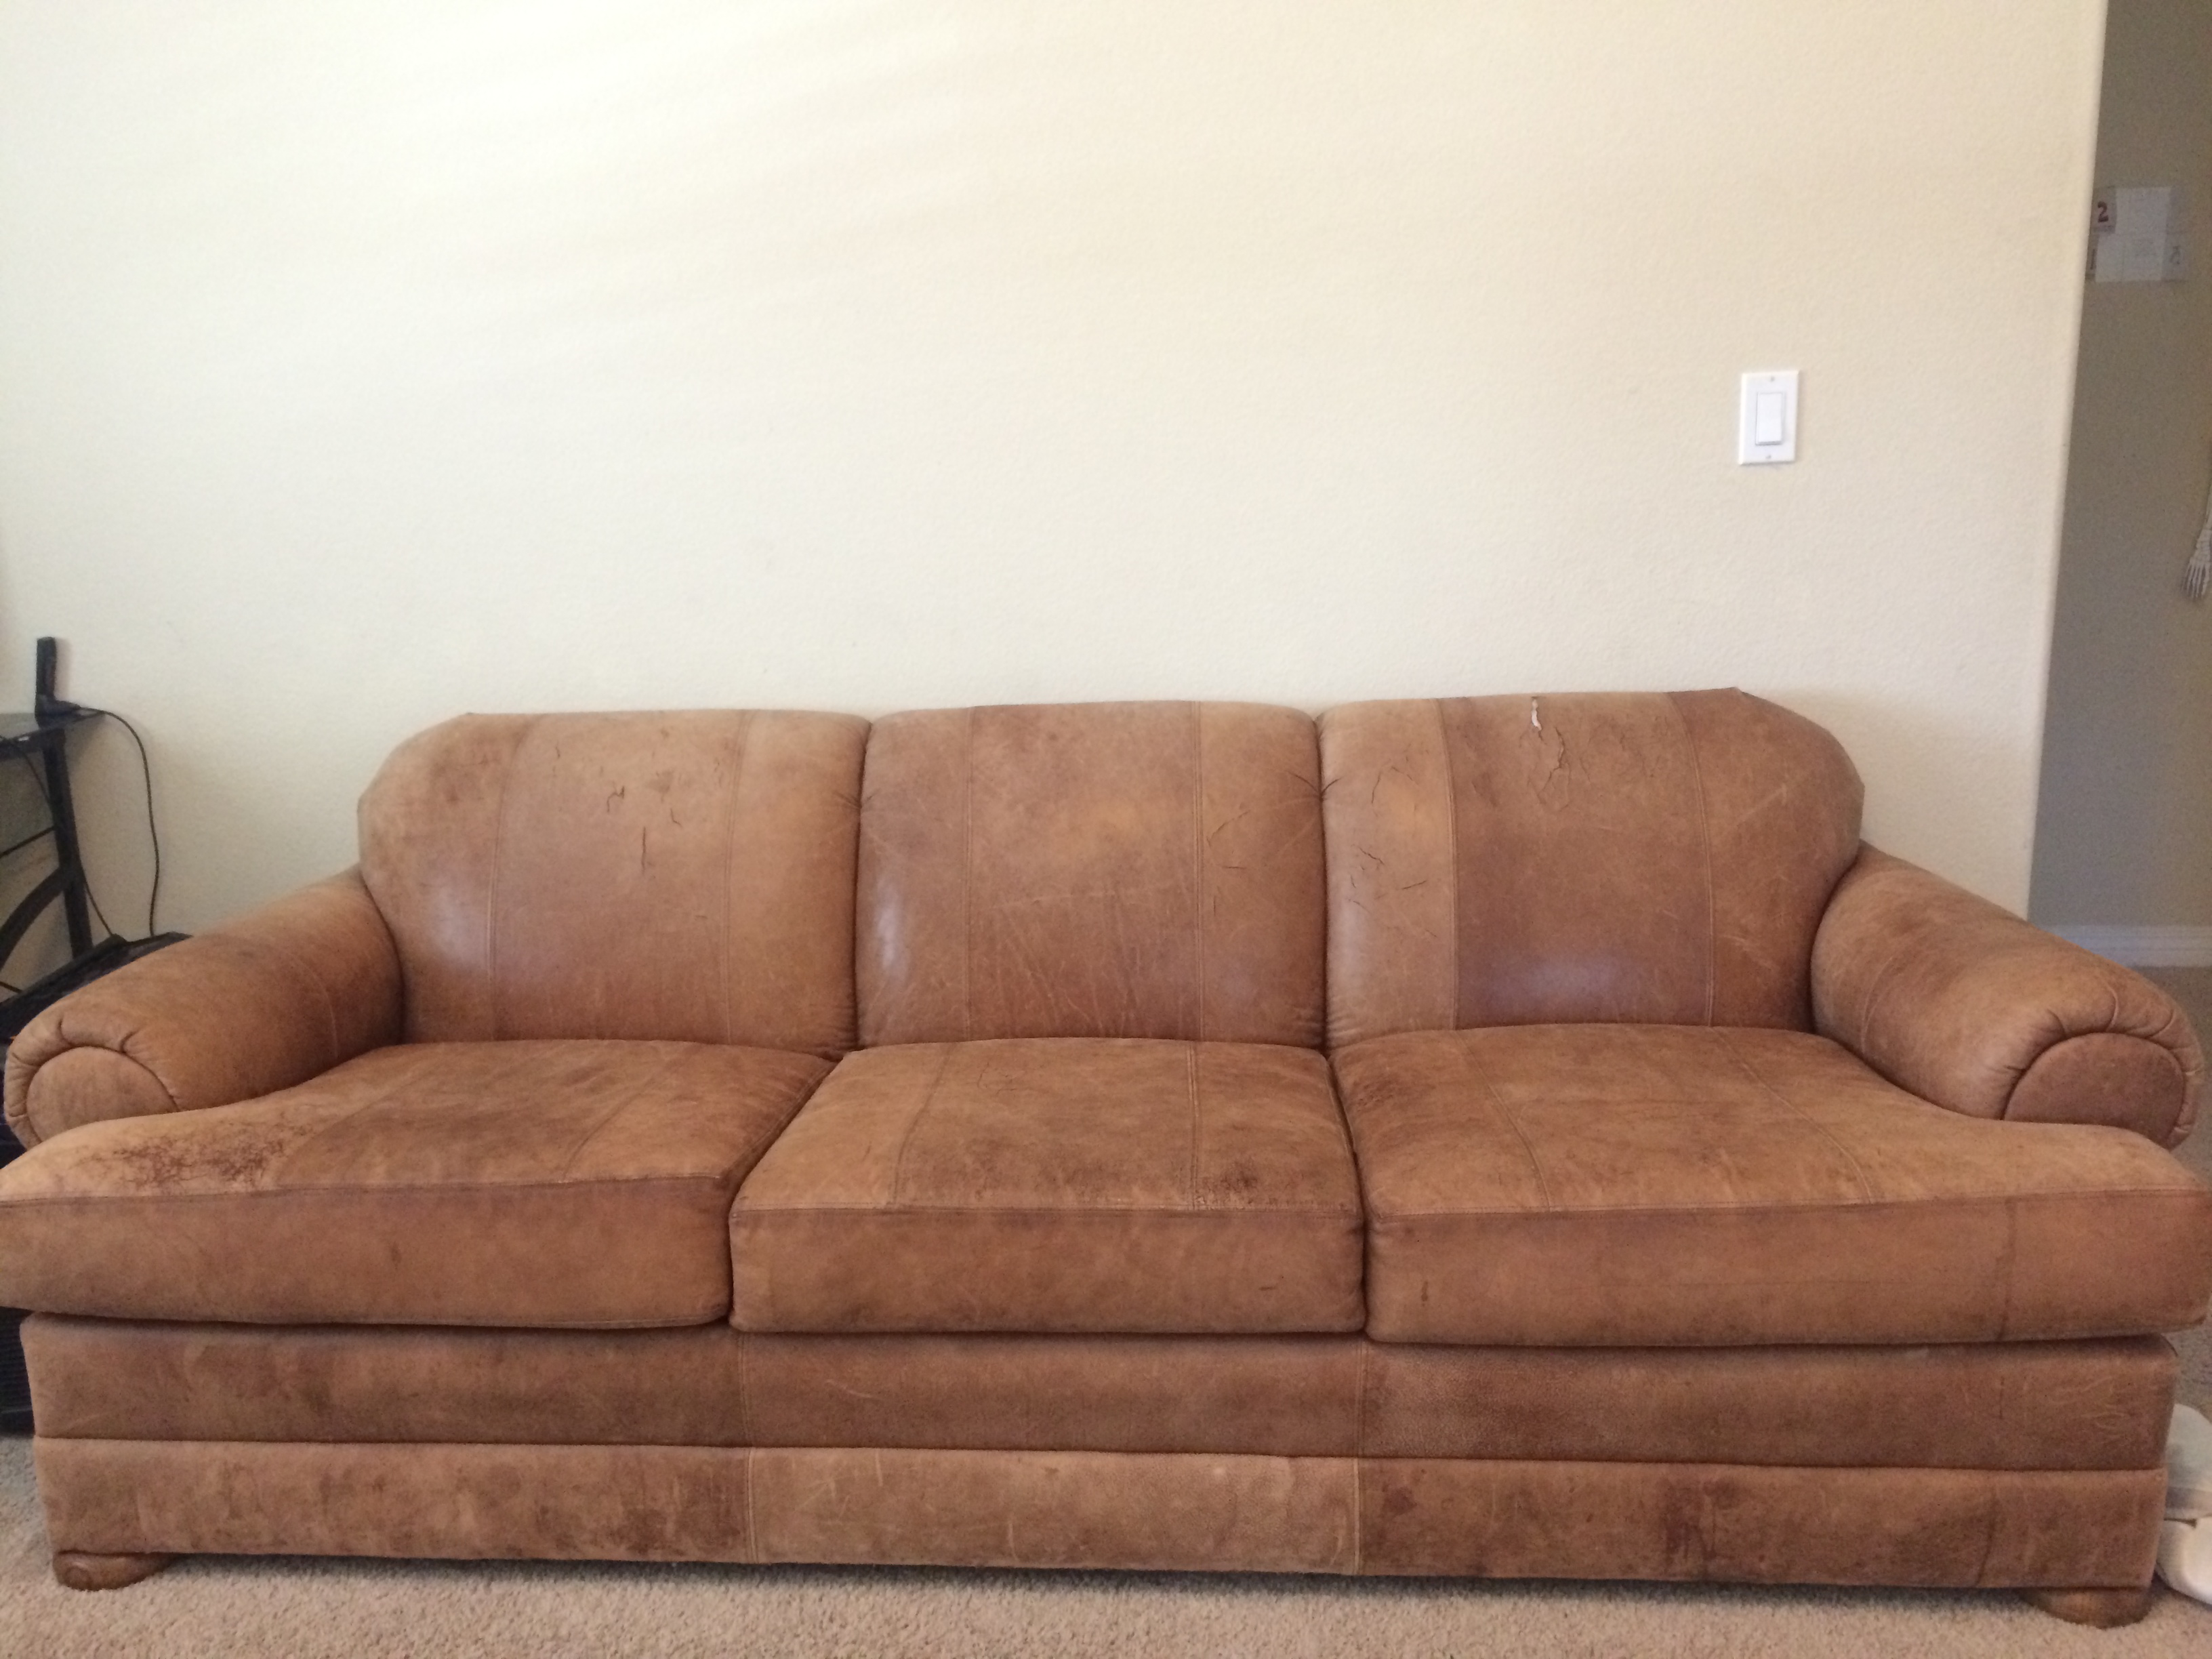 Nubuck Leather Couch To Clean Fix, Nubuck Leather Furniture